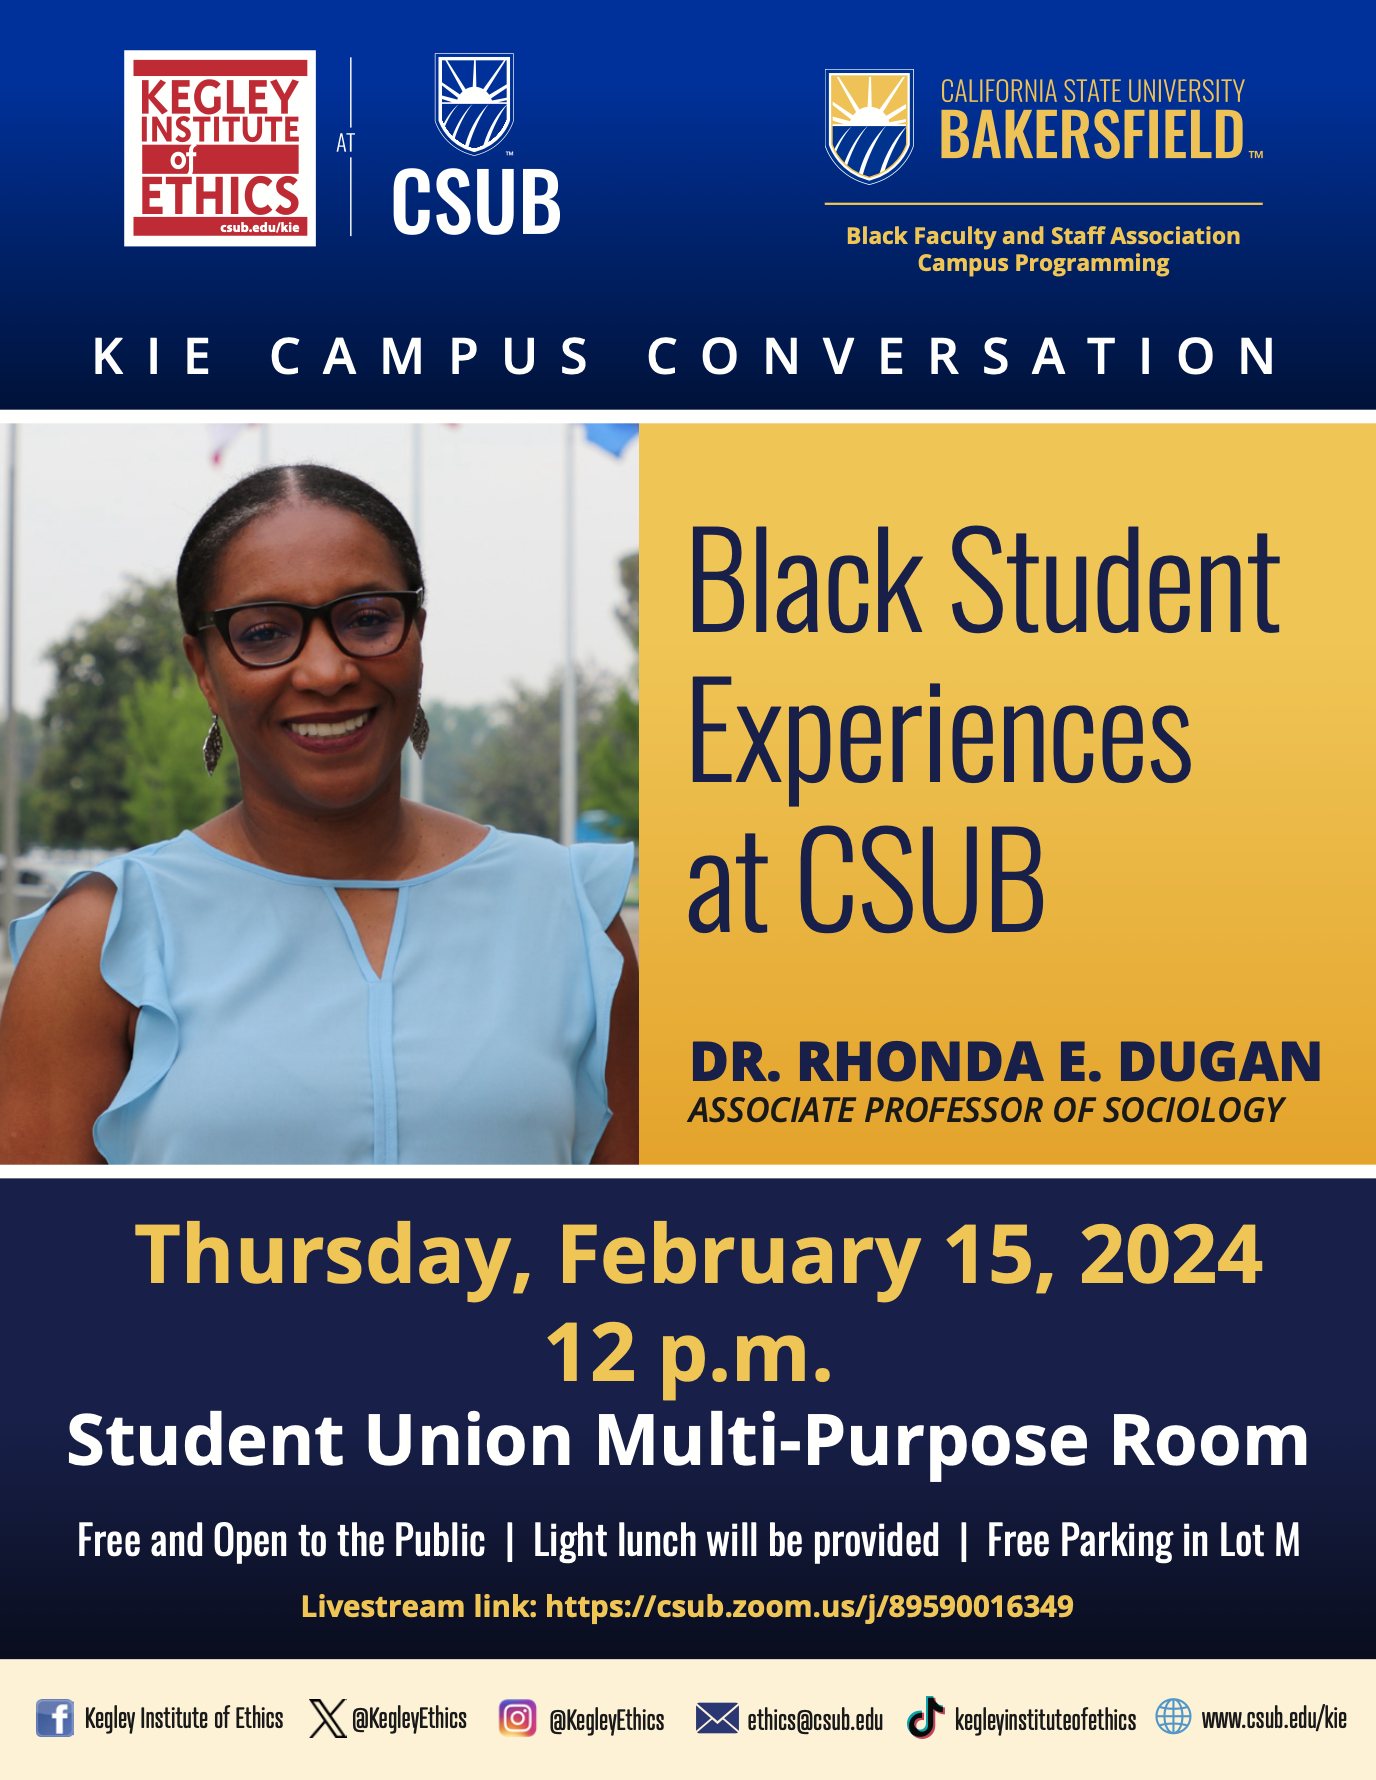 Flyer for Black Student Experiences at CSUB with Dr. Rhonda E. Dugan